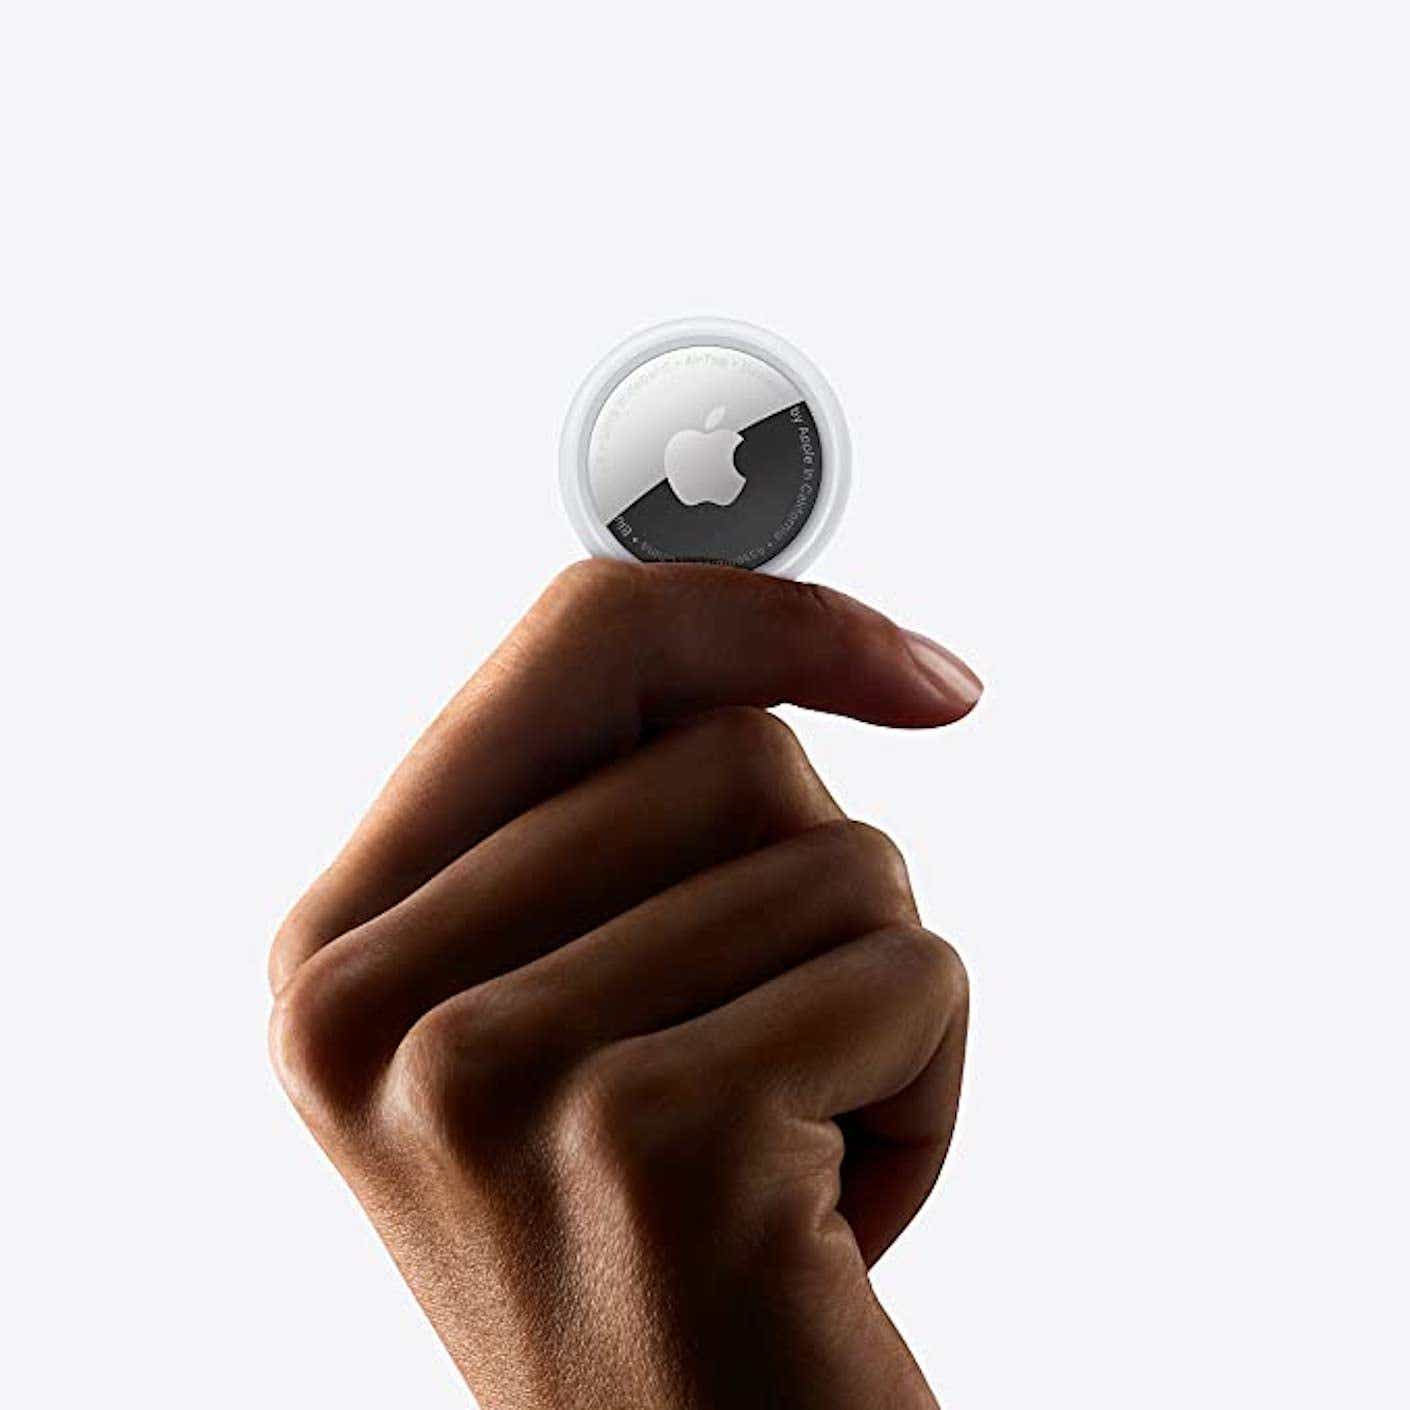 A disembodied hand holds up a single, circular, silver and white Apple AirTag.